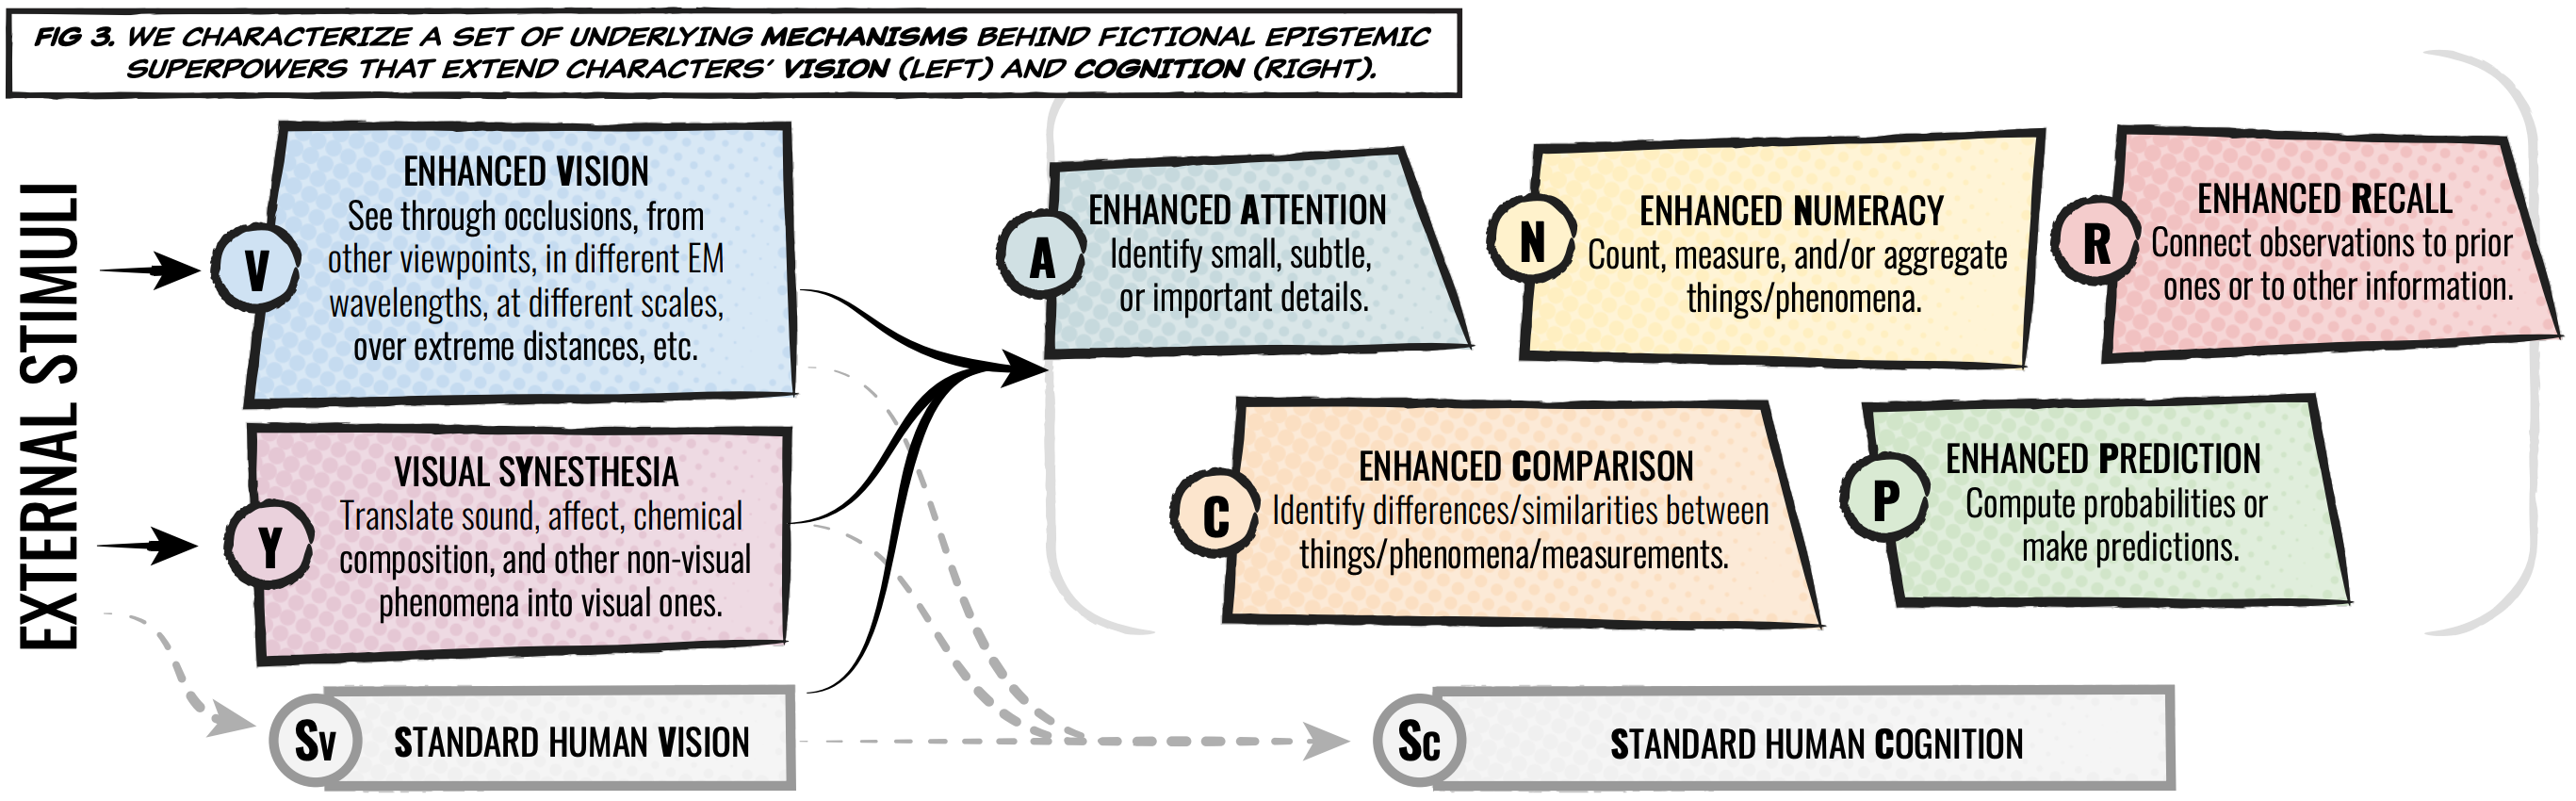 Underlying mechanisms behind fictional epistemic superpowers that extend characters' vision (left) and cognition (right).